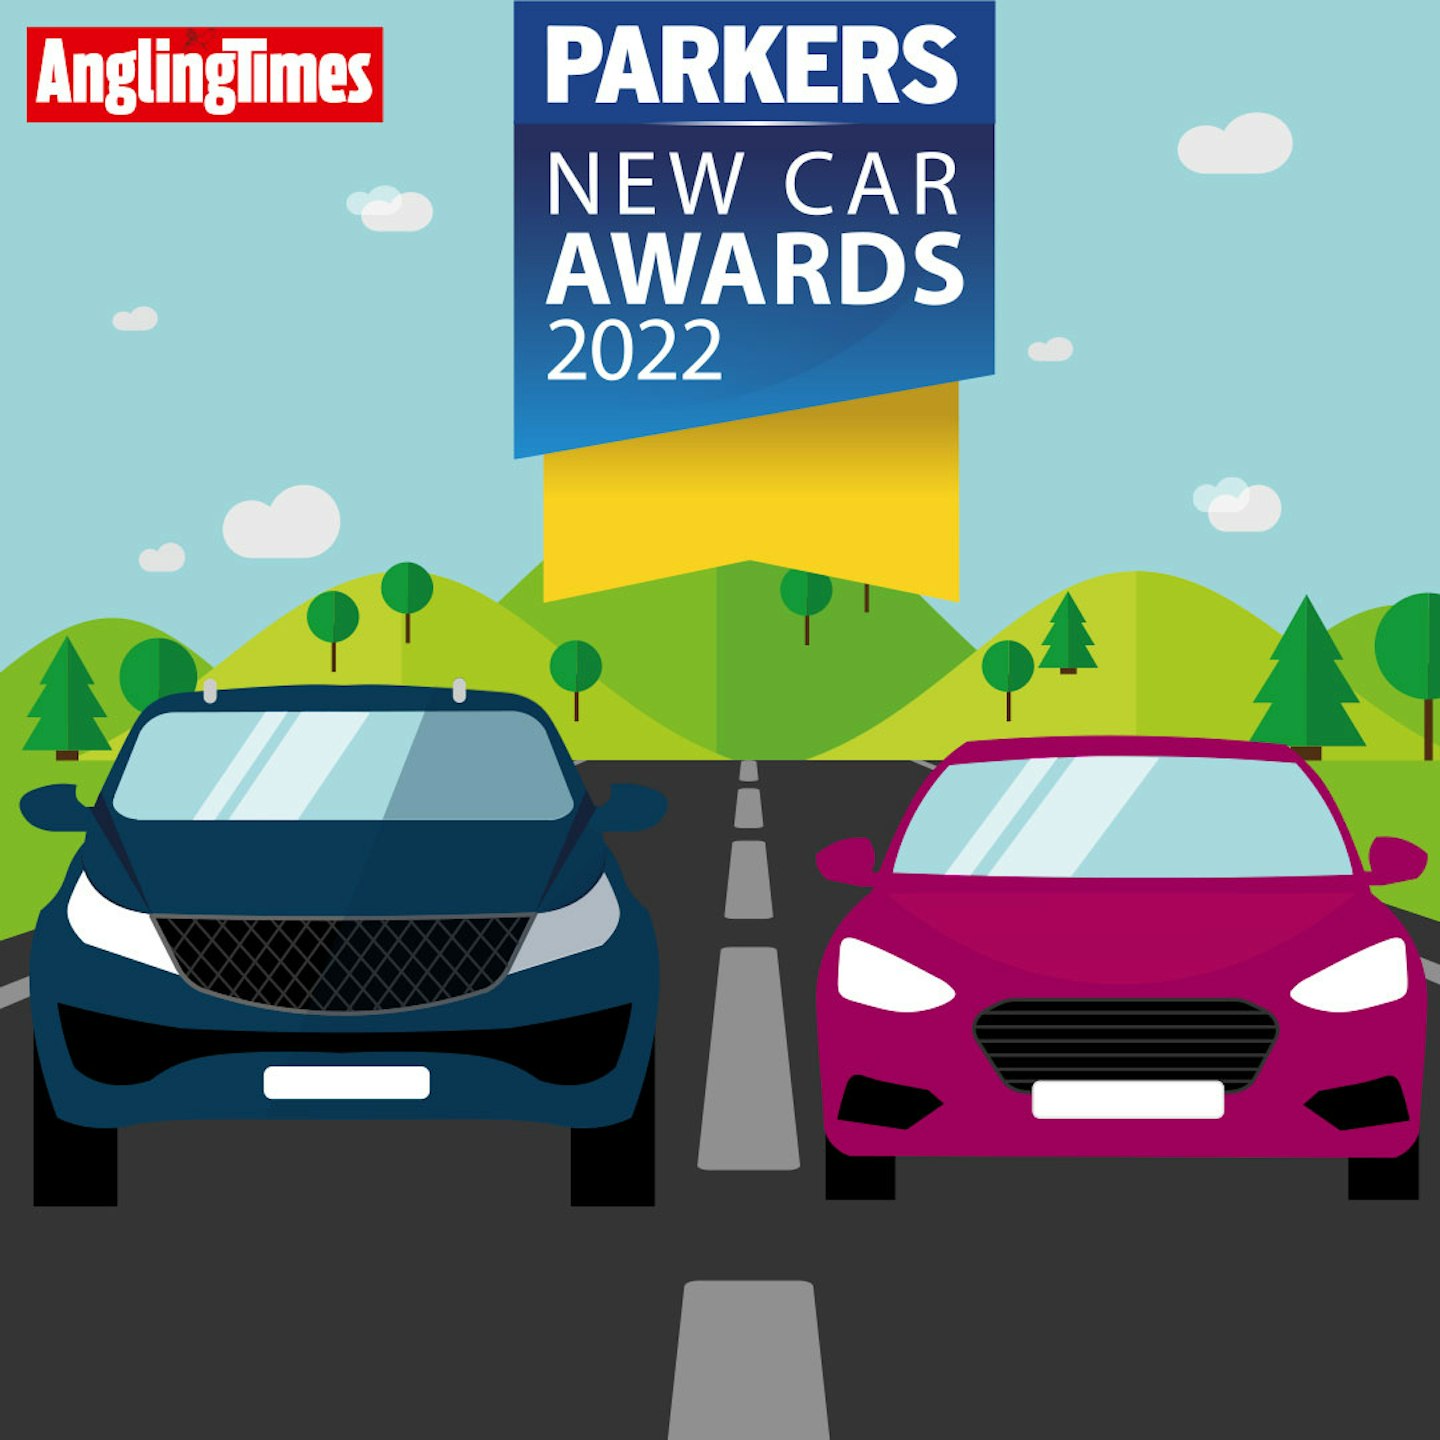 Parkers – the definitive resource for car buying advice in the UK – has partnered Angling Times to bring you the award for the Best Medium Van in the prestigious Parkers New Car Awards 2022